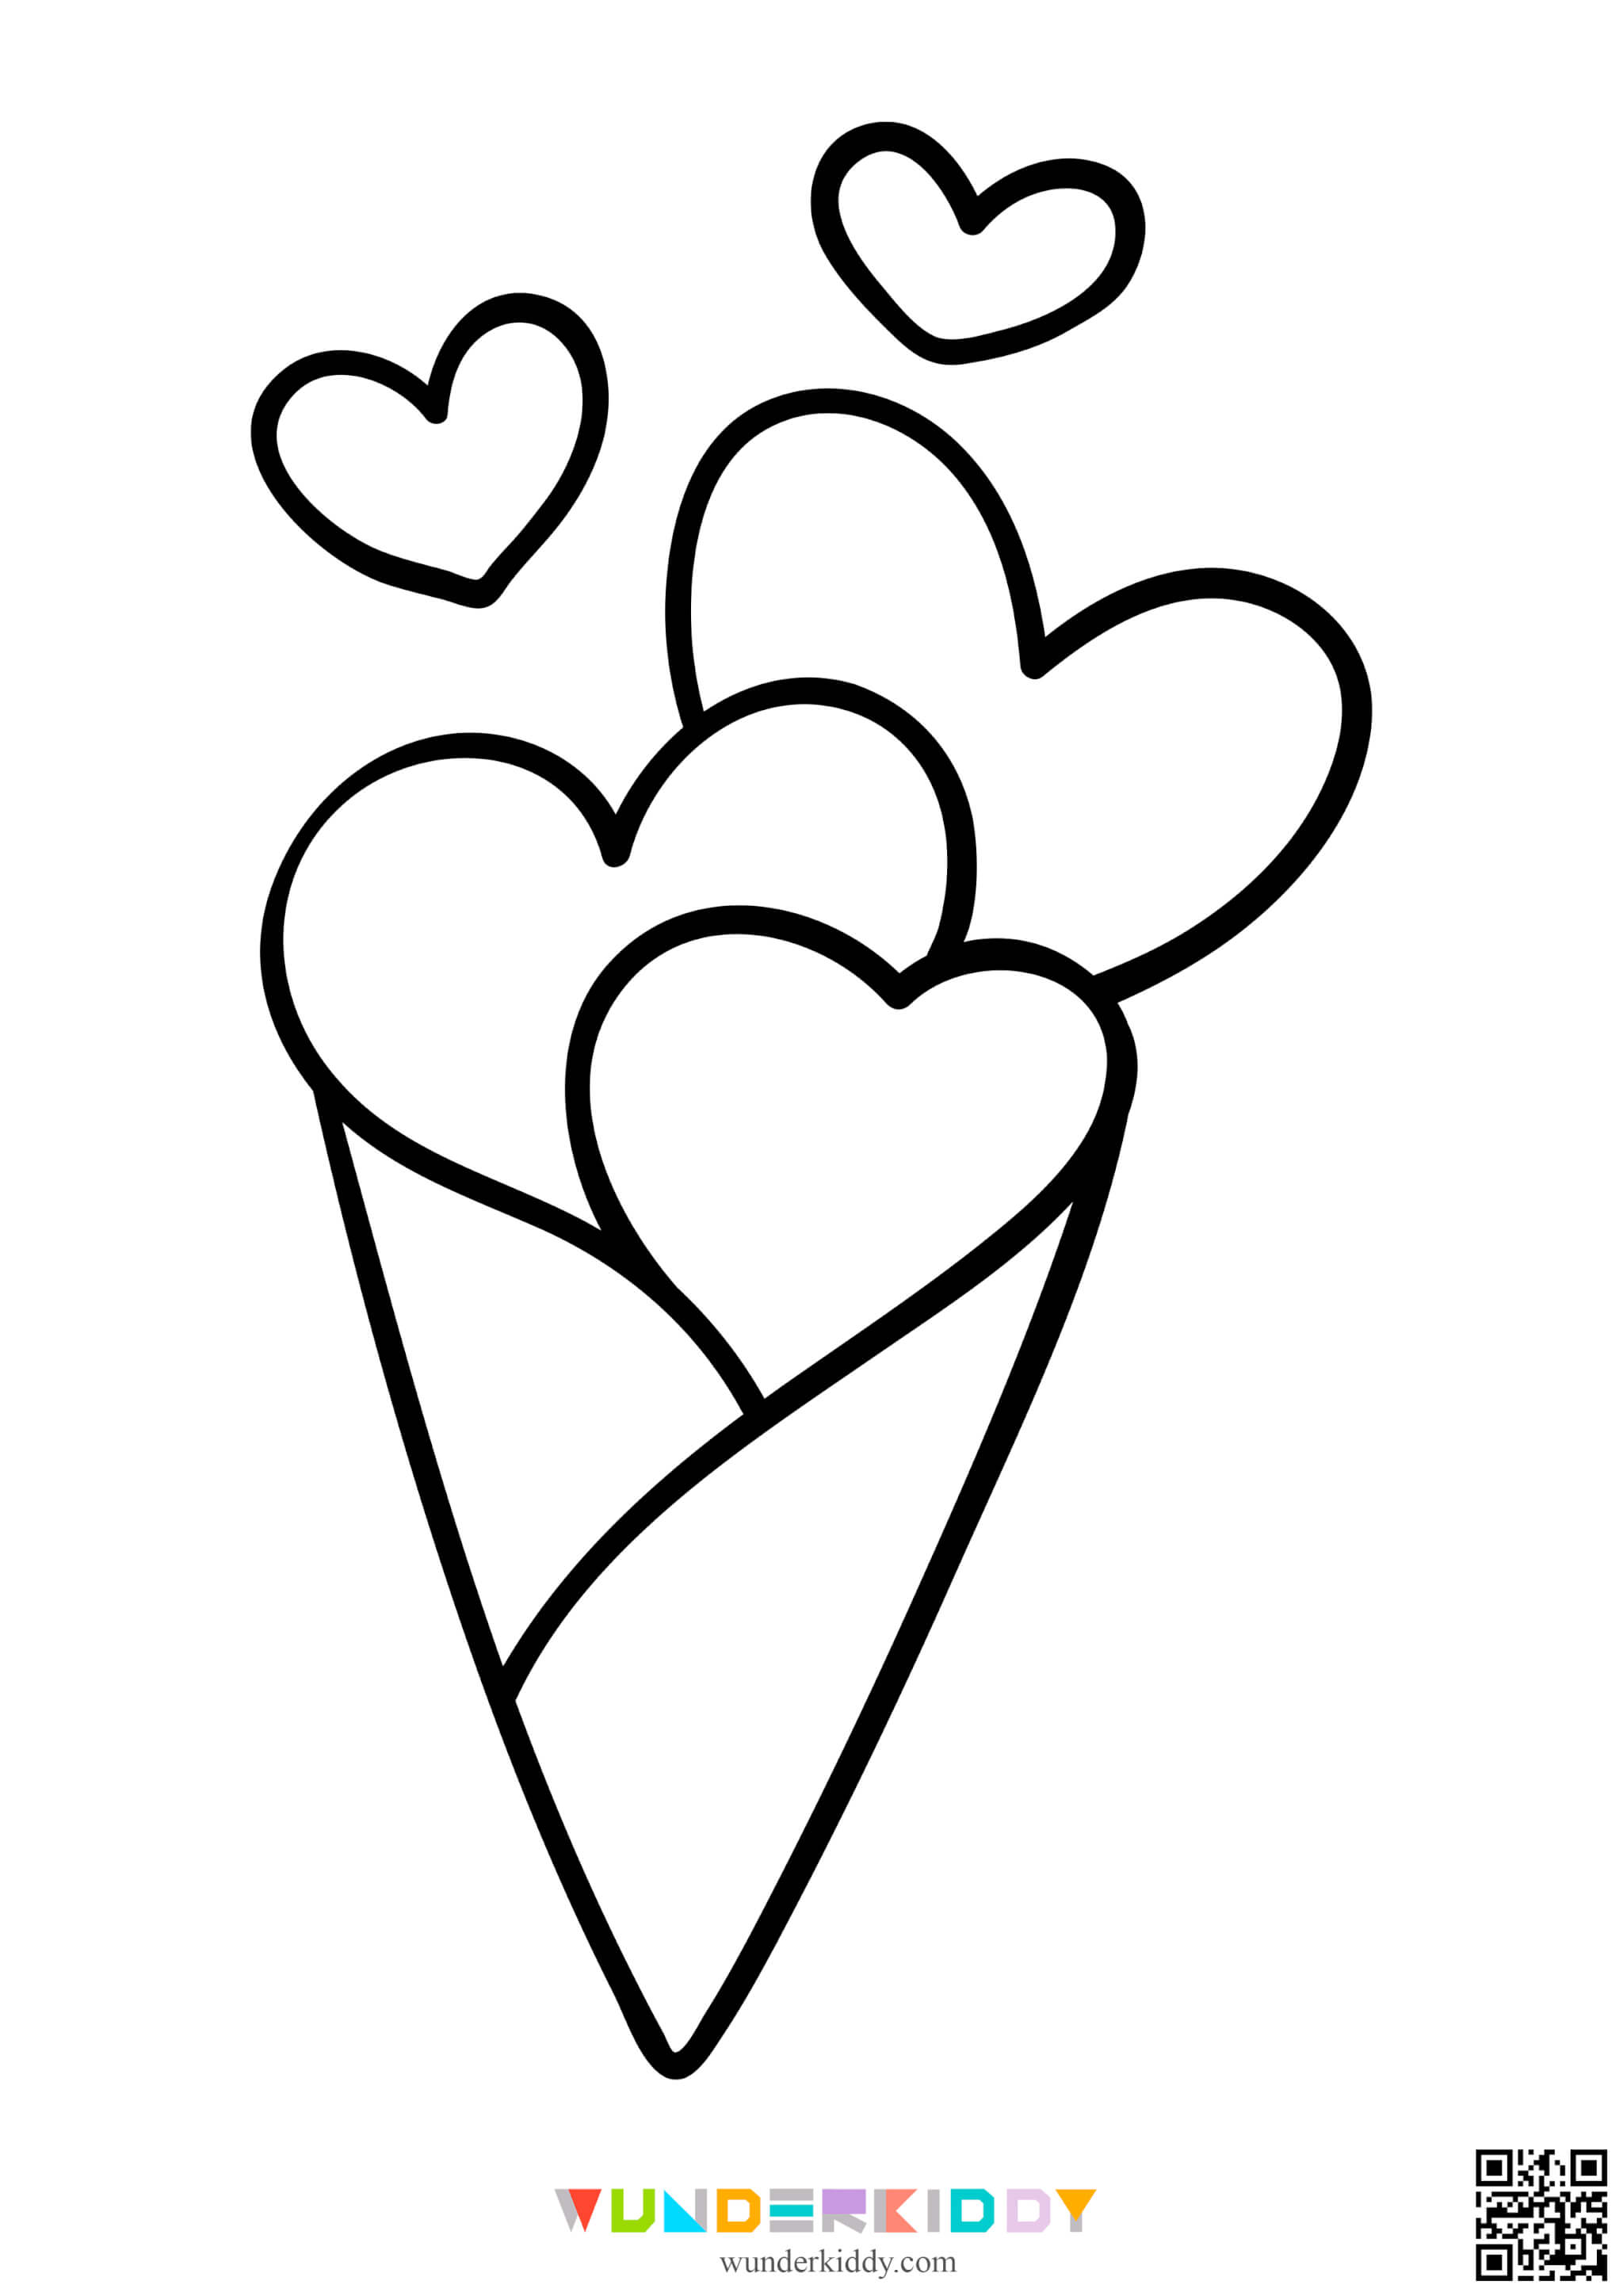 Valentines Coloring Pages - Image 16